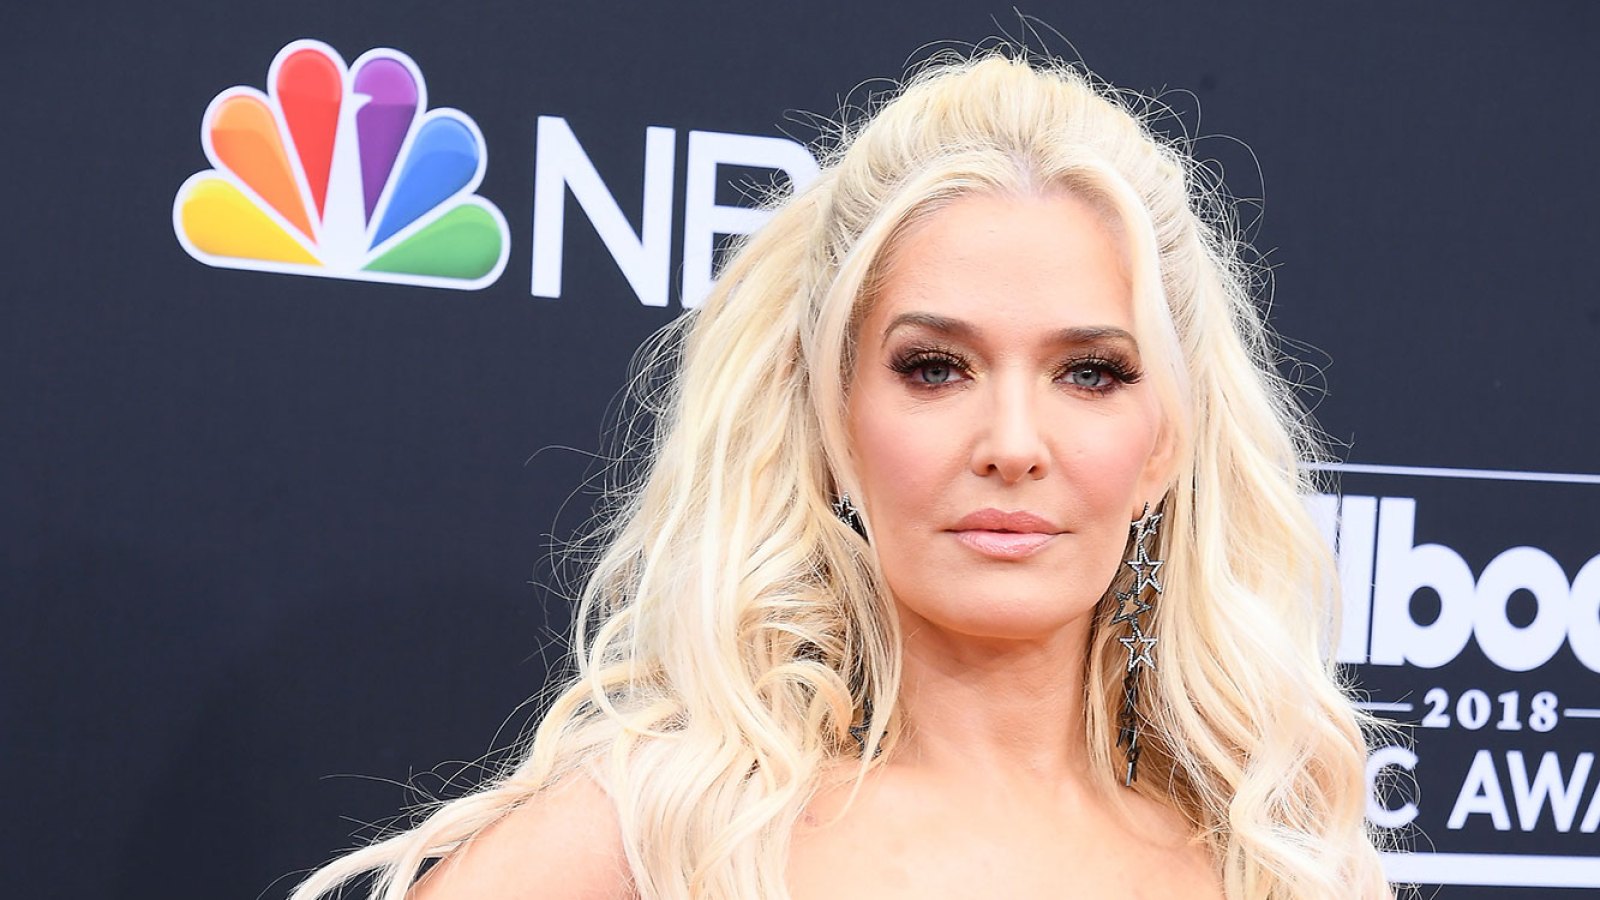 Erika Jayne Fires Back at ‘Disgusting’ Comment About Her Son as ‘RHOBH’ Stars Are Trolled Over LVP Drama